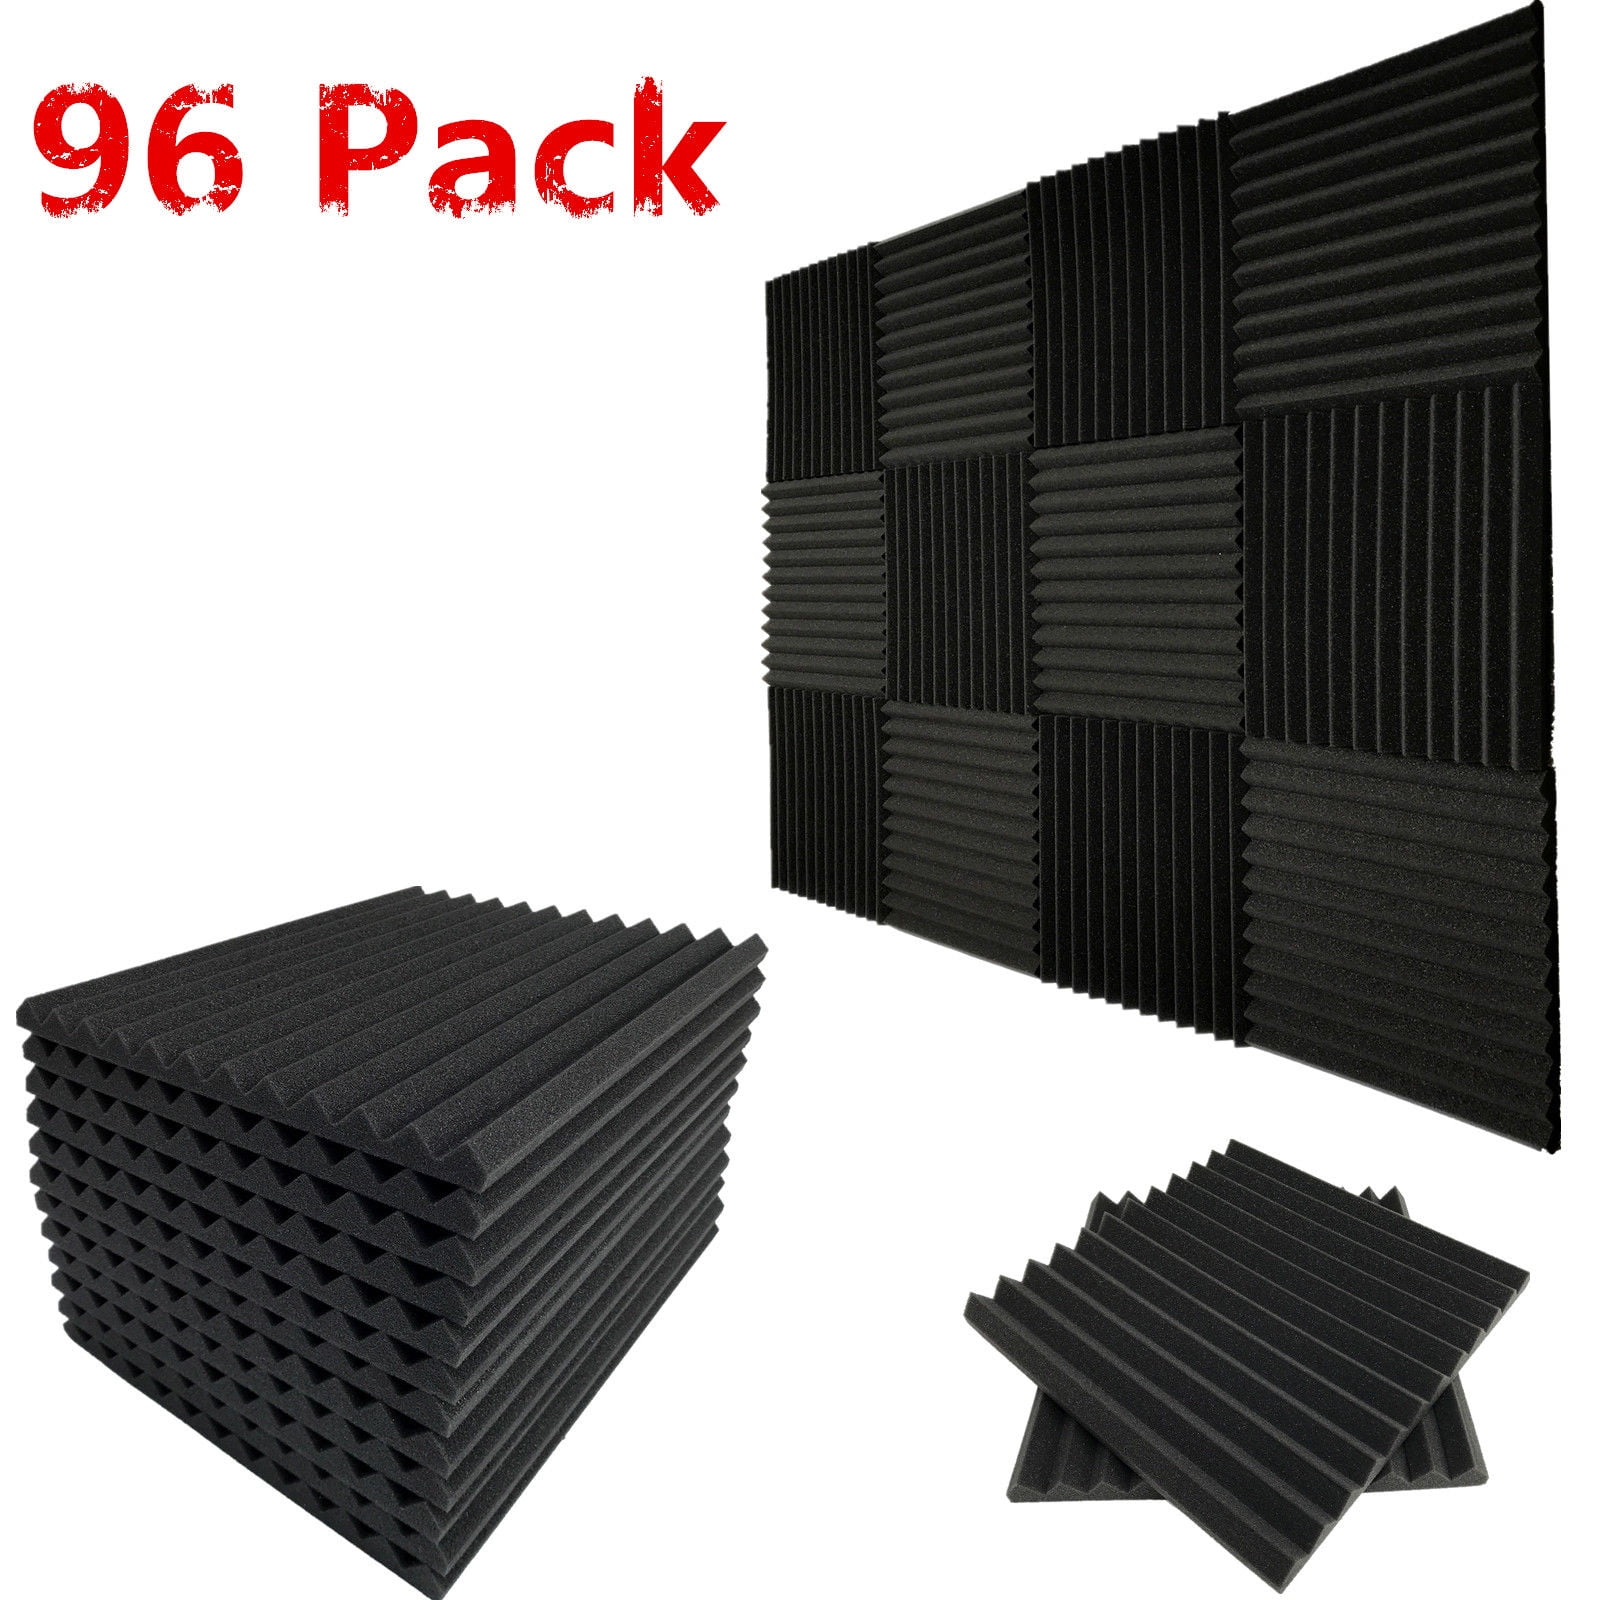 Details about   96 Pack Acoustic Foam Panel Wedge Studio Soundproofing Wall Tiles 12" X 12" Z8 